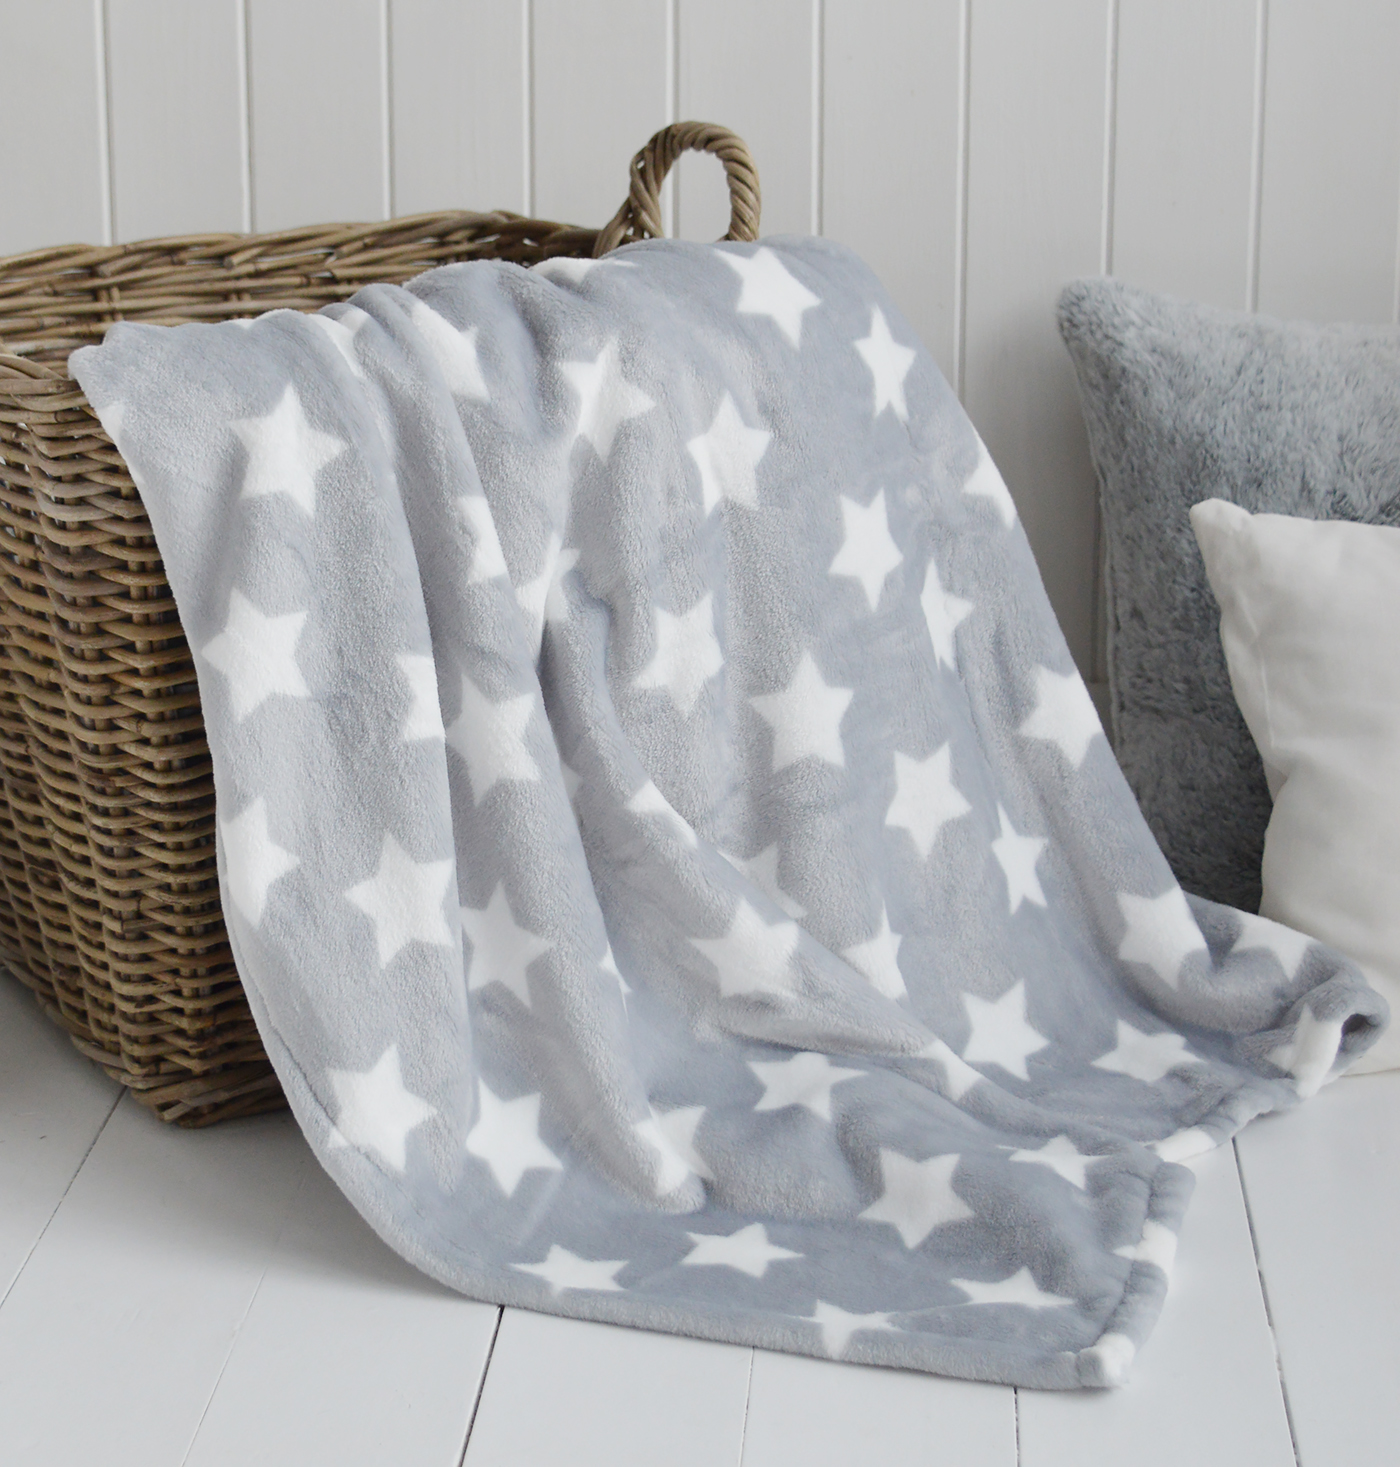 Grey and White Star Throws for bed and sofa  from The White Lighthouse Furniture and Interiors for the Hallway, living room, bedroom and bathroom in New England styles country, coastal and city homes